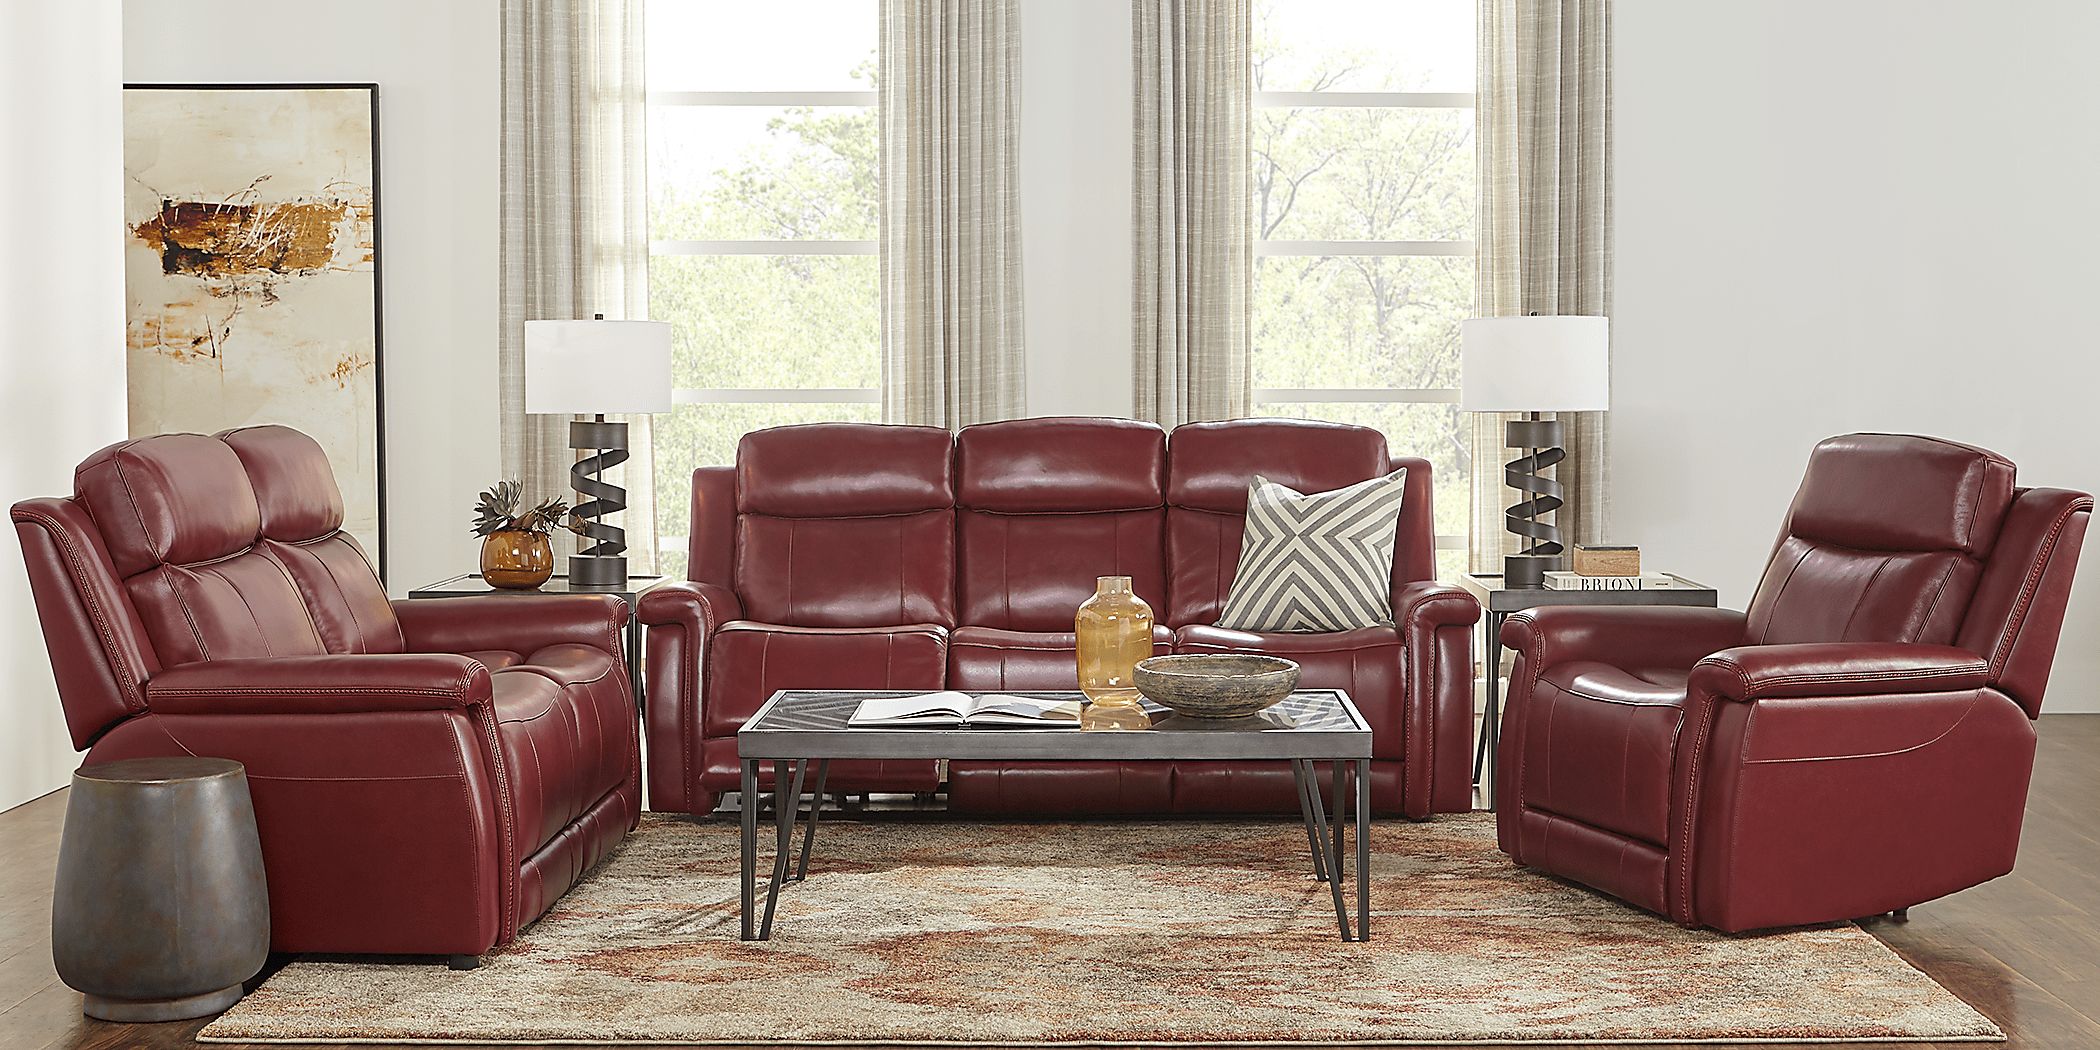 Orsini Red Leather 2 Pc Living Room with Dual Power Reclining Sofa